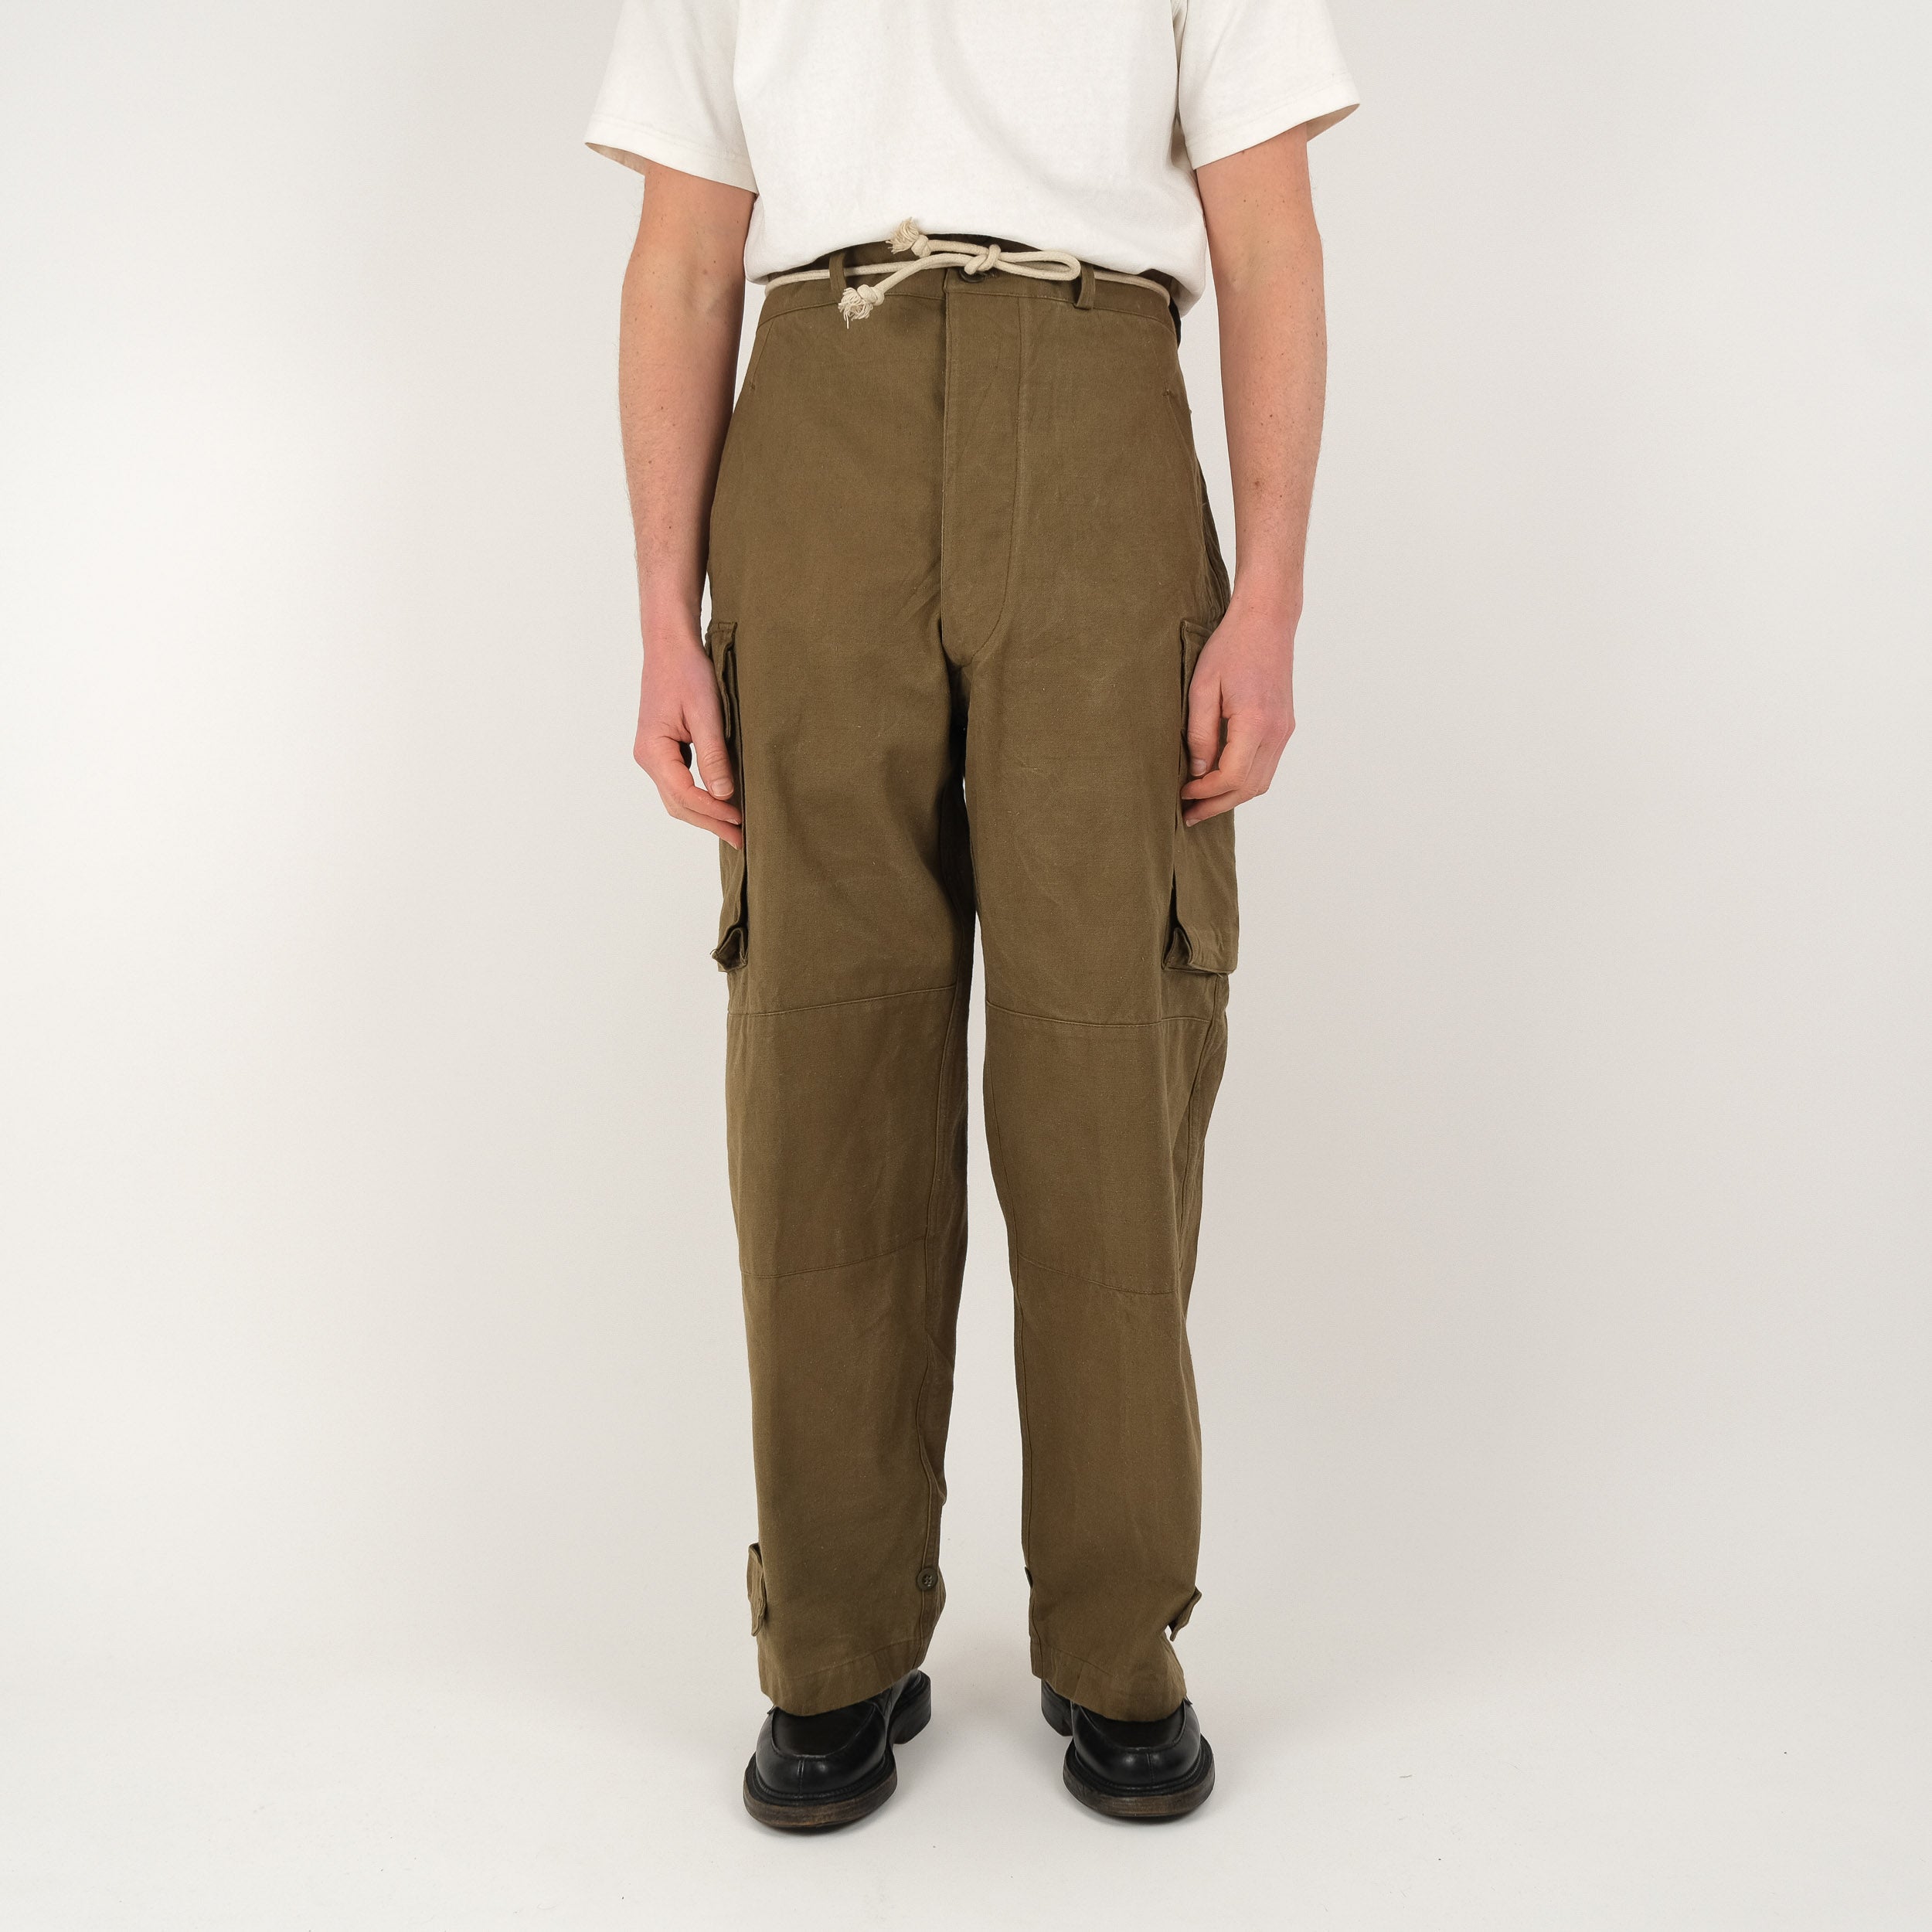 m47 french pants - tag 35